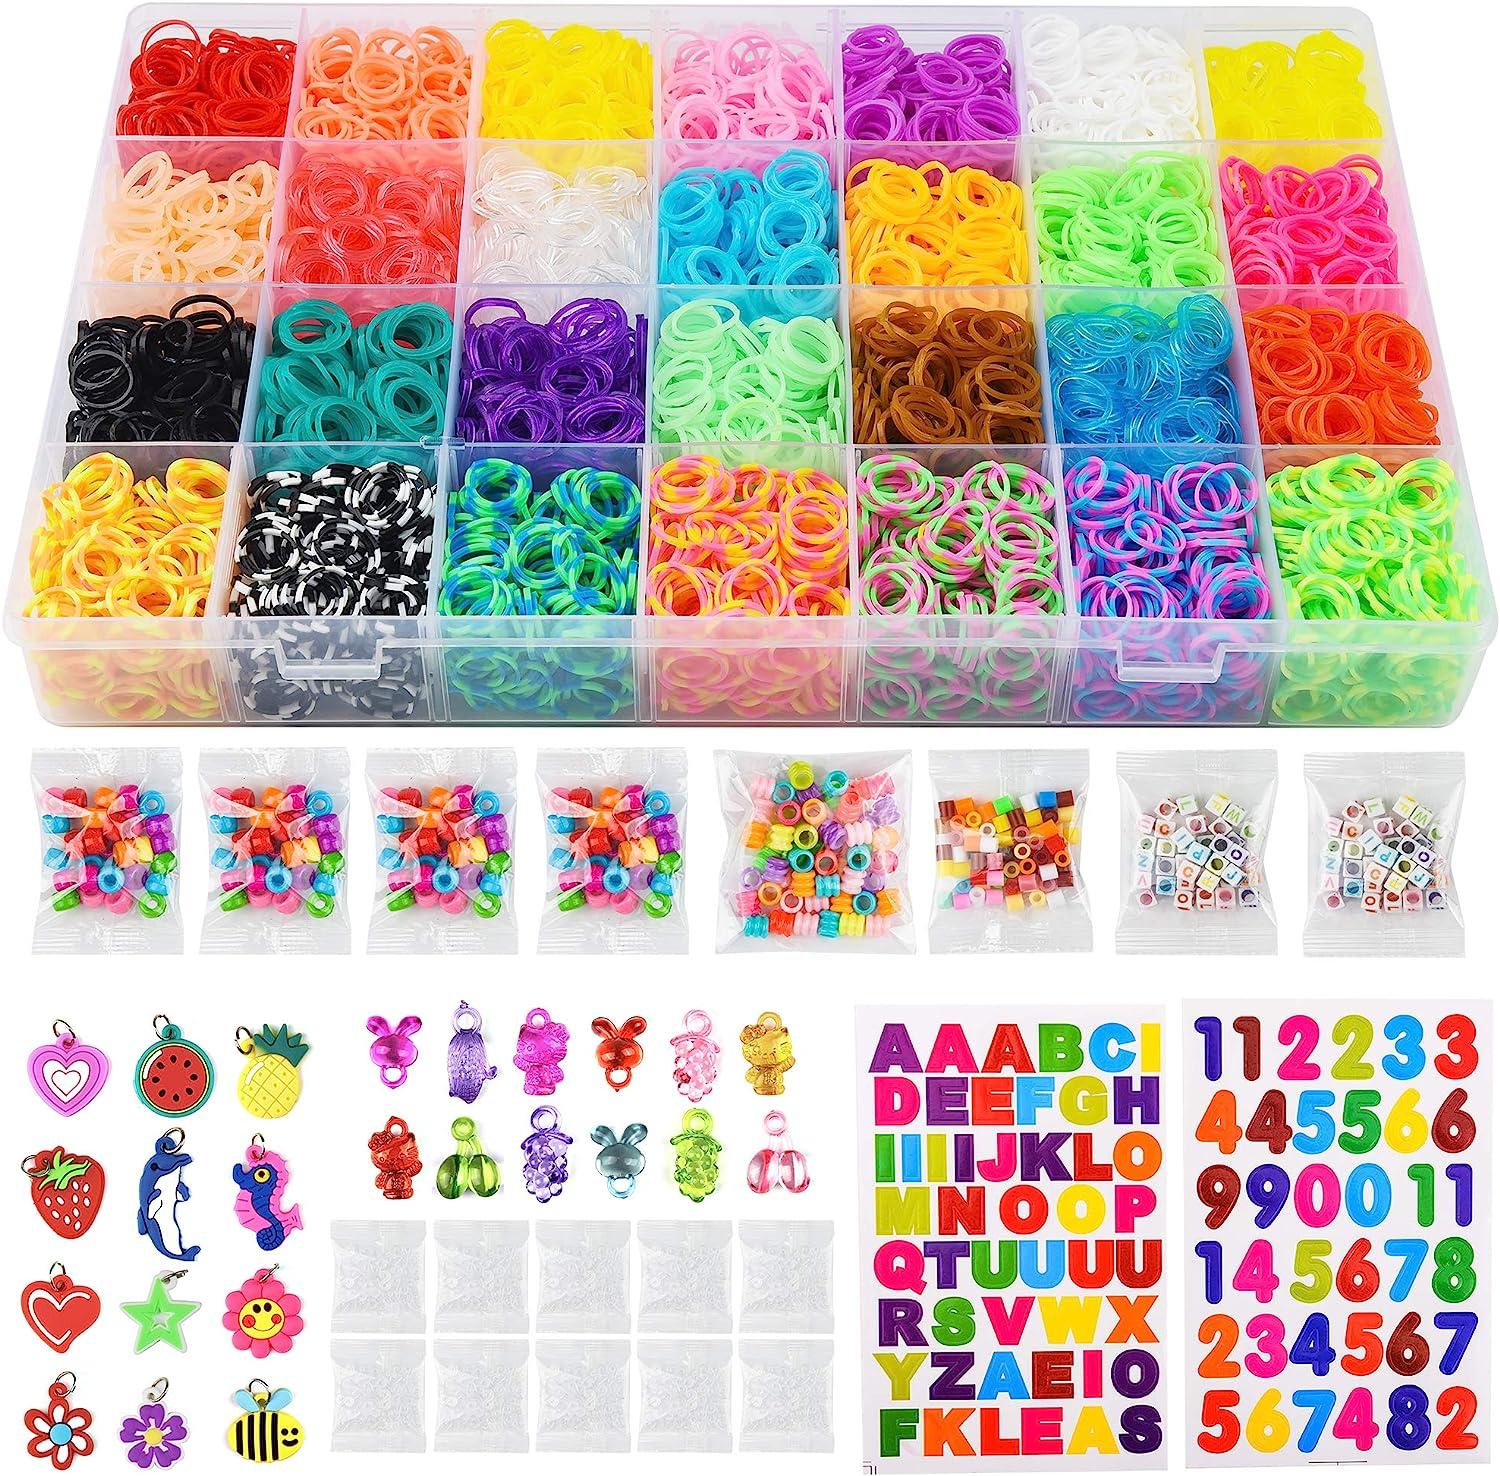 Mudo Nest 11,860+ Rubber Bands Refill Loom Set: 11,000 DIY Loom Bands 500 Clips, 210 Beads, 46 Charms, Loom Bracelet Making Kit for Kids,Rubber Band